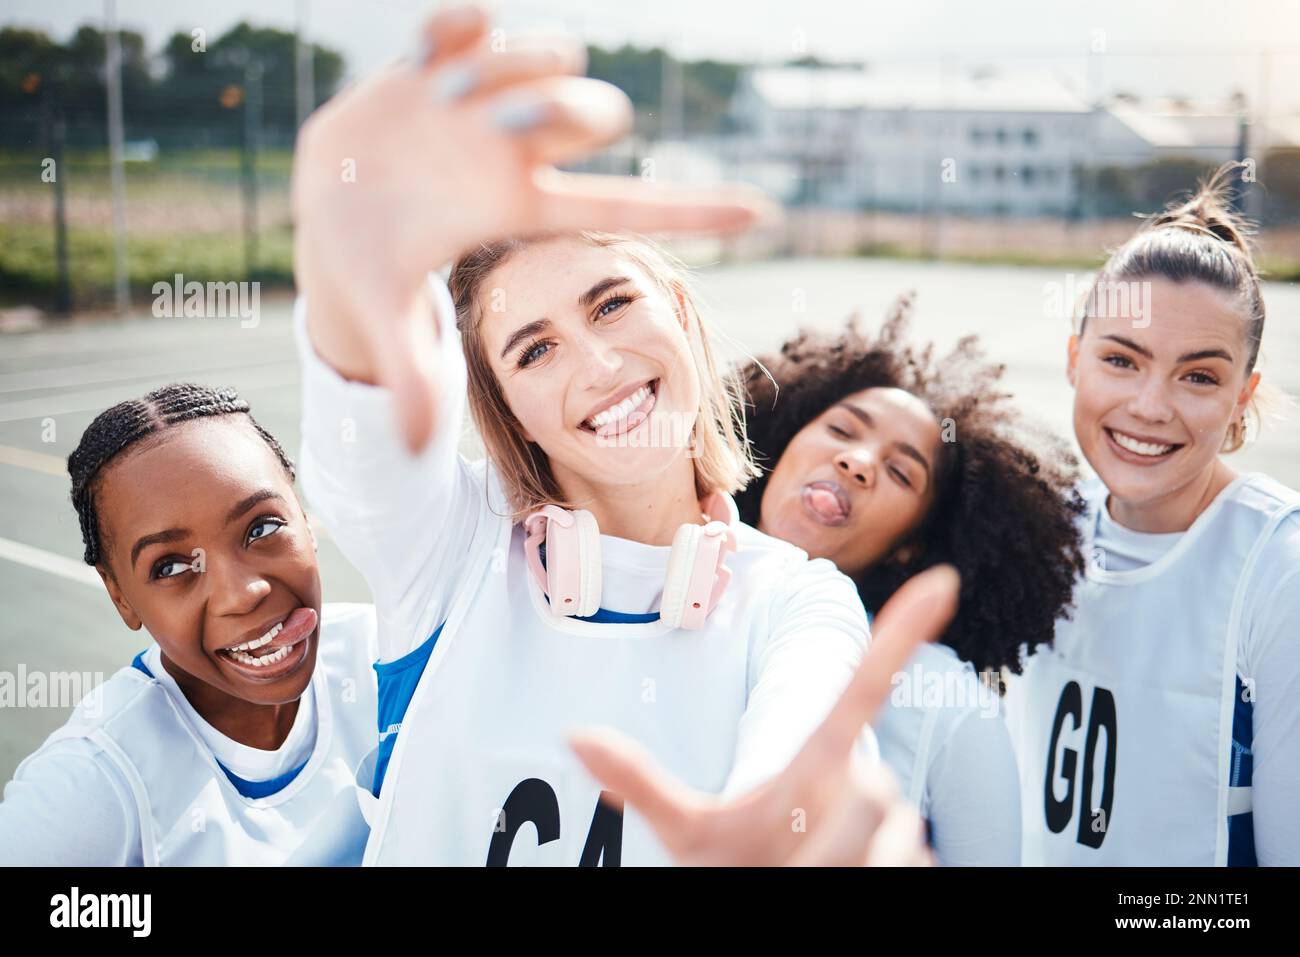 Selfie, frame and a woman sports team having fun on a court outdoor together for fitness or training. Portrait, netball and funny with a group of Stock Photo